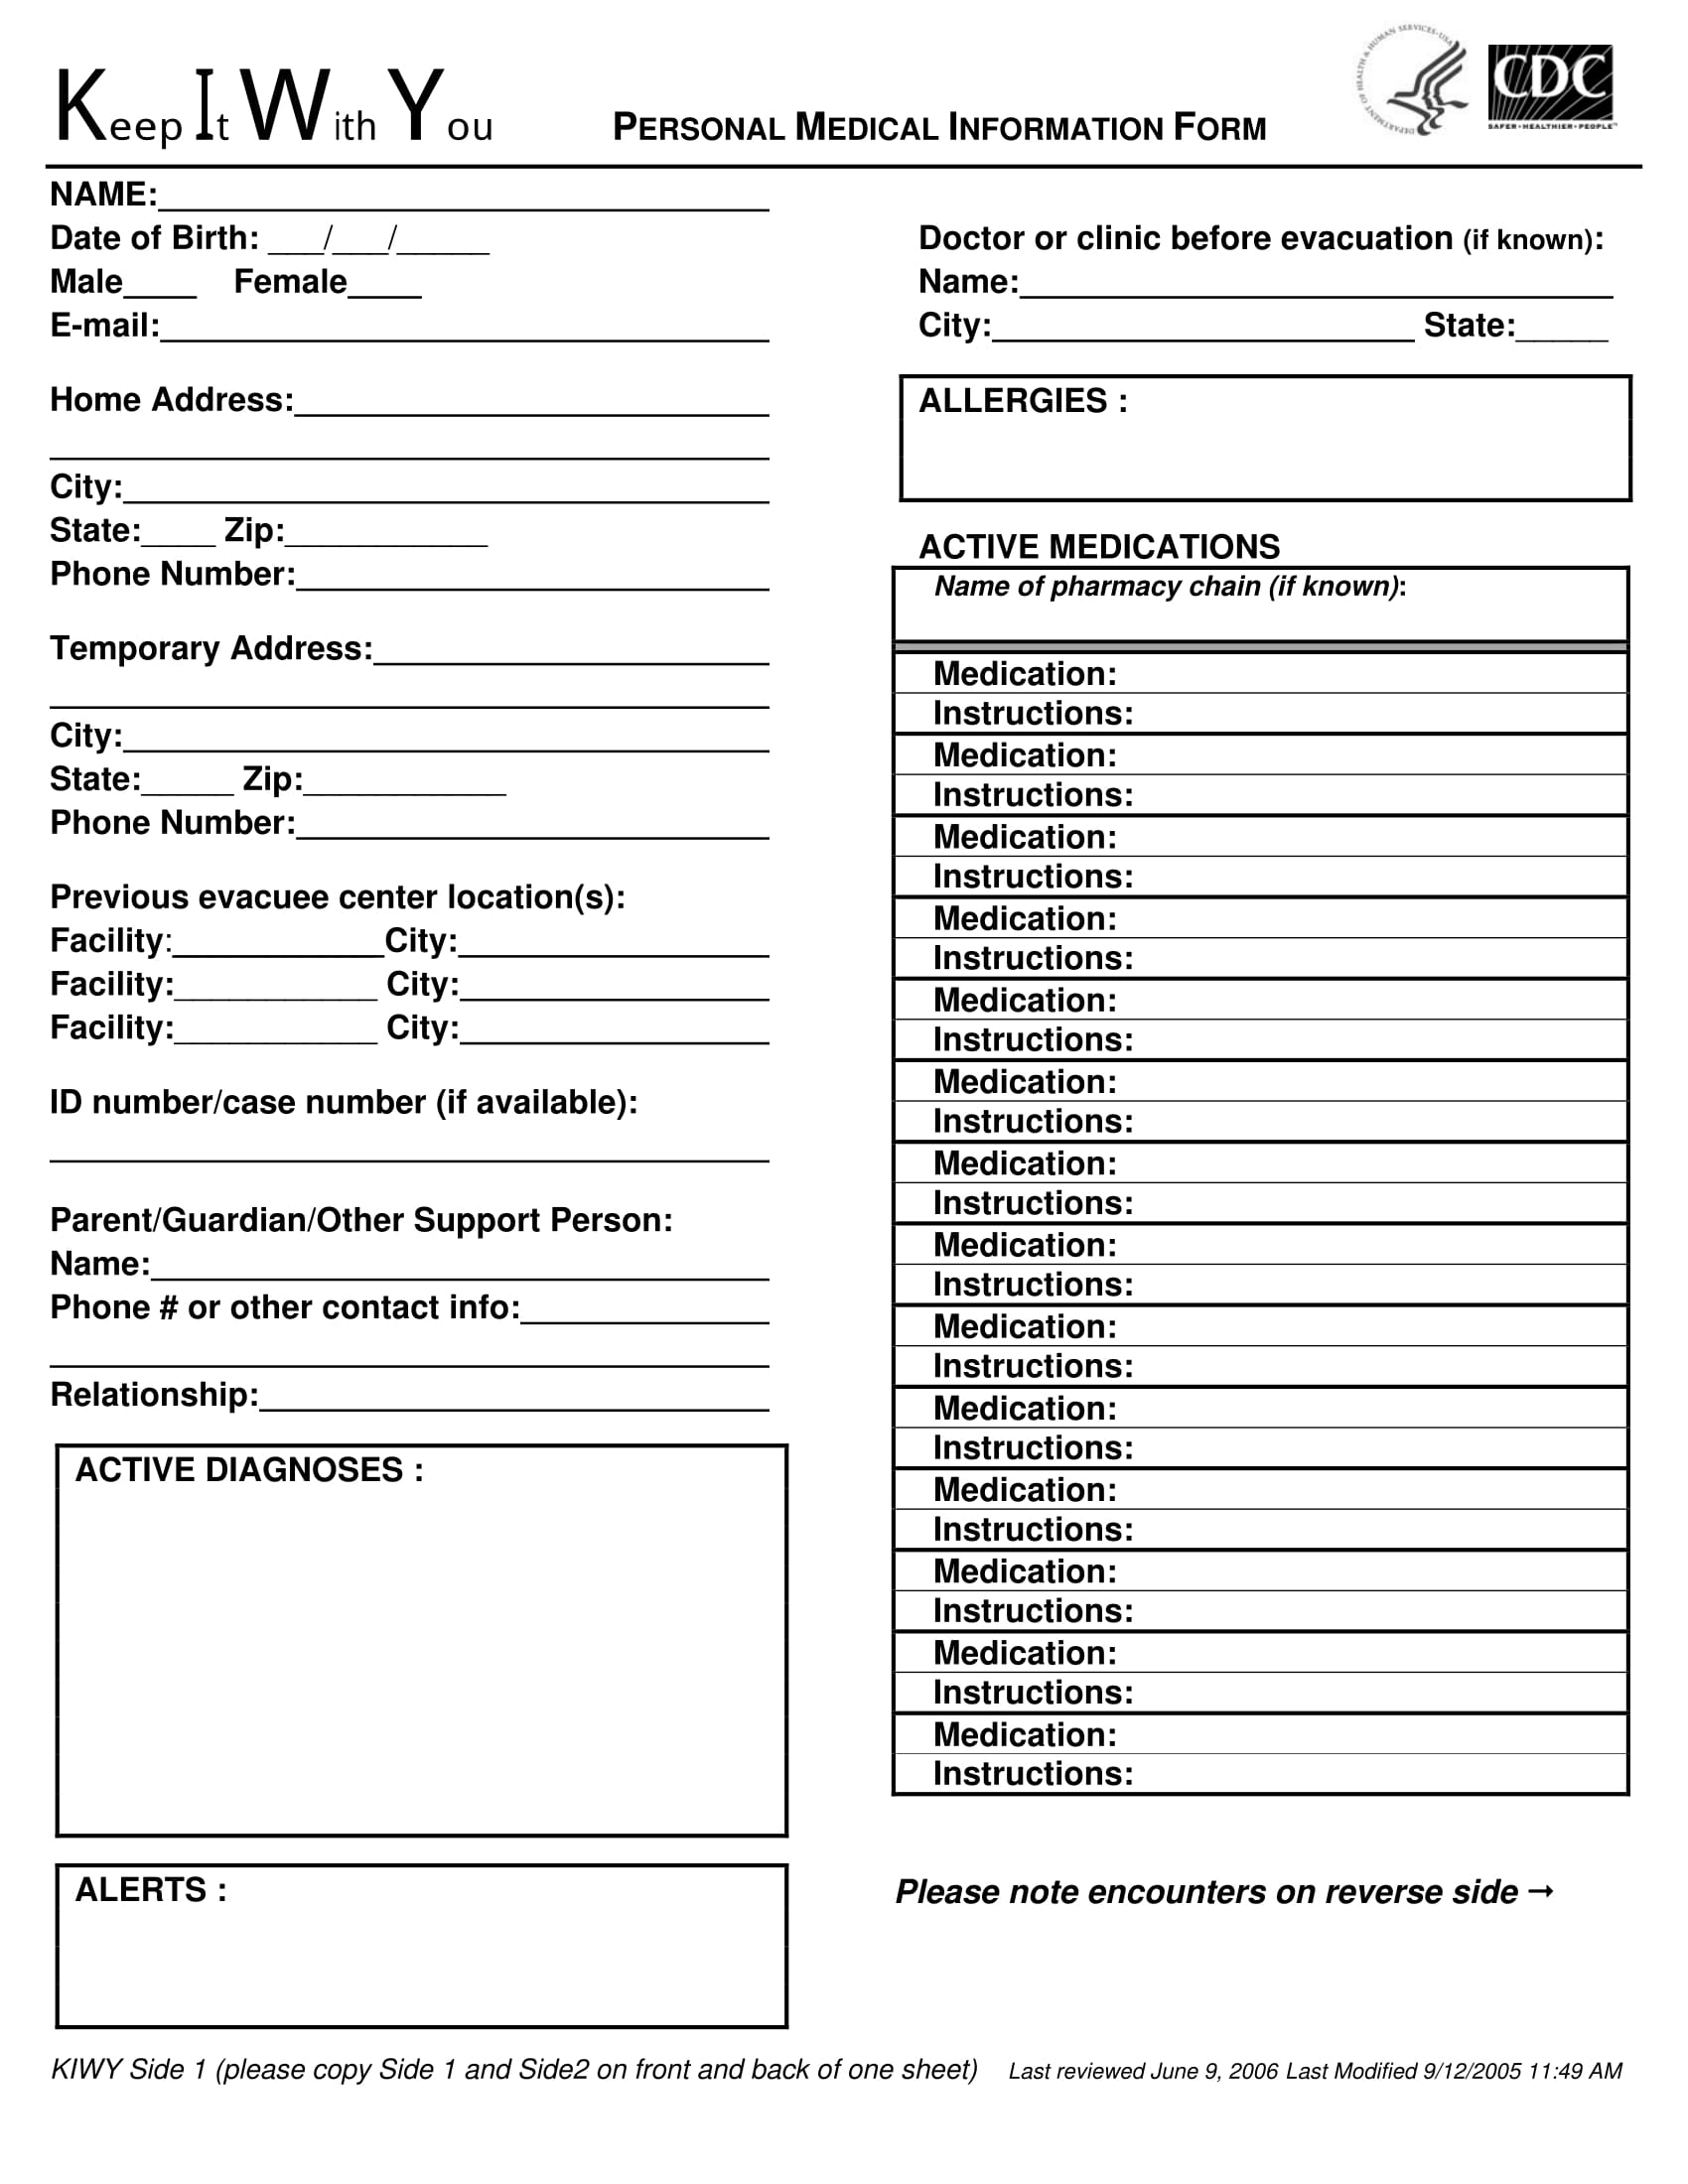 personal medical information form 2